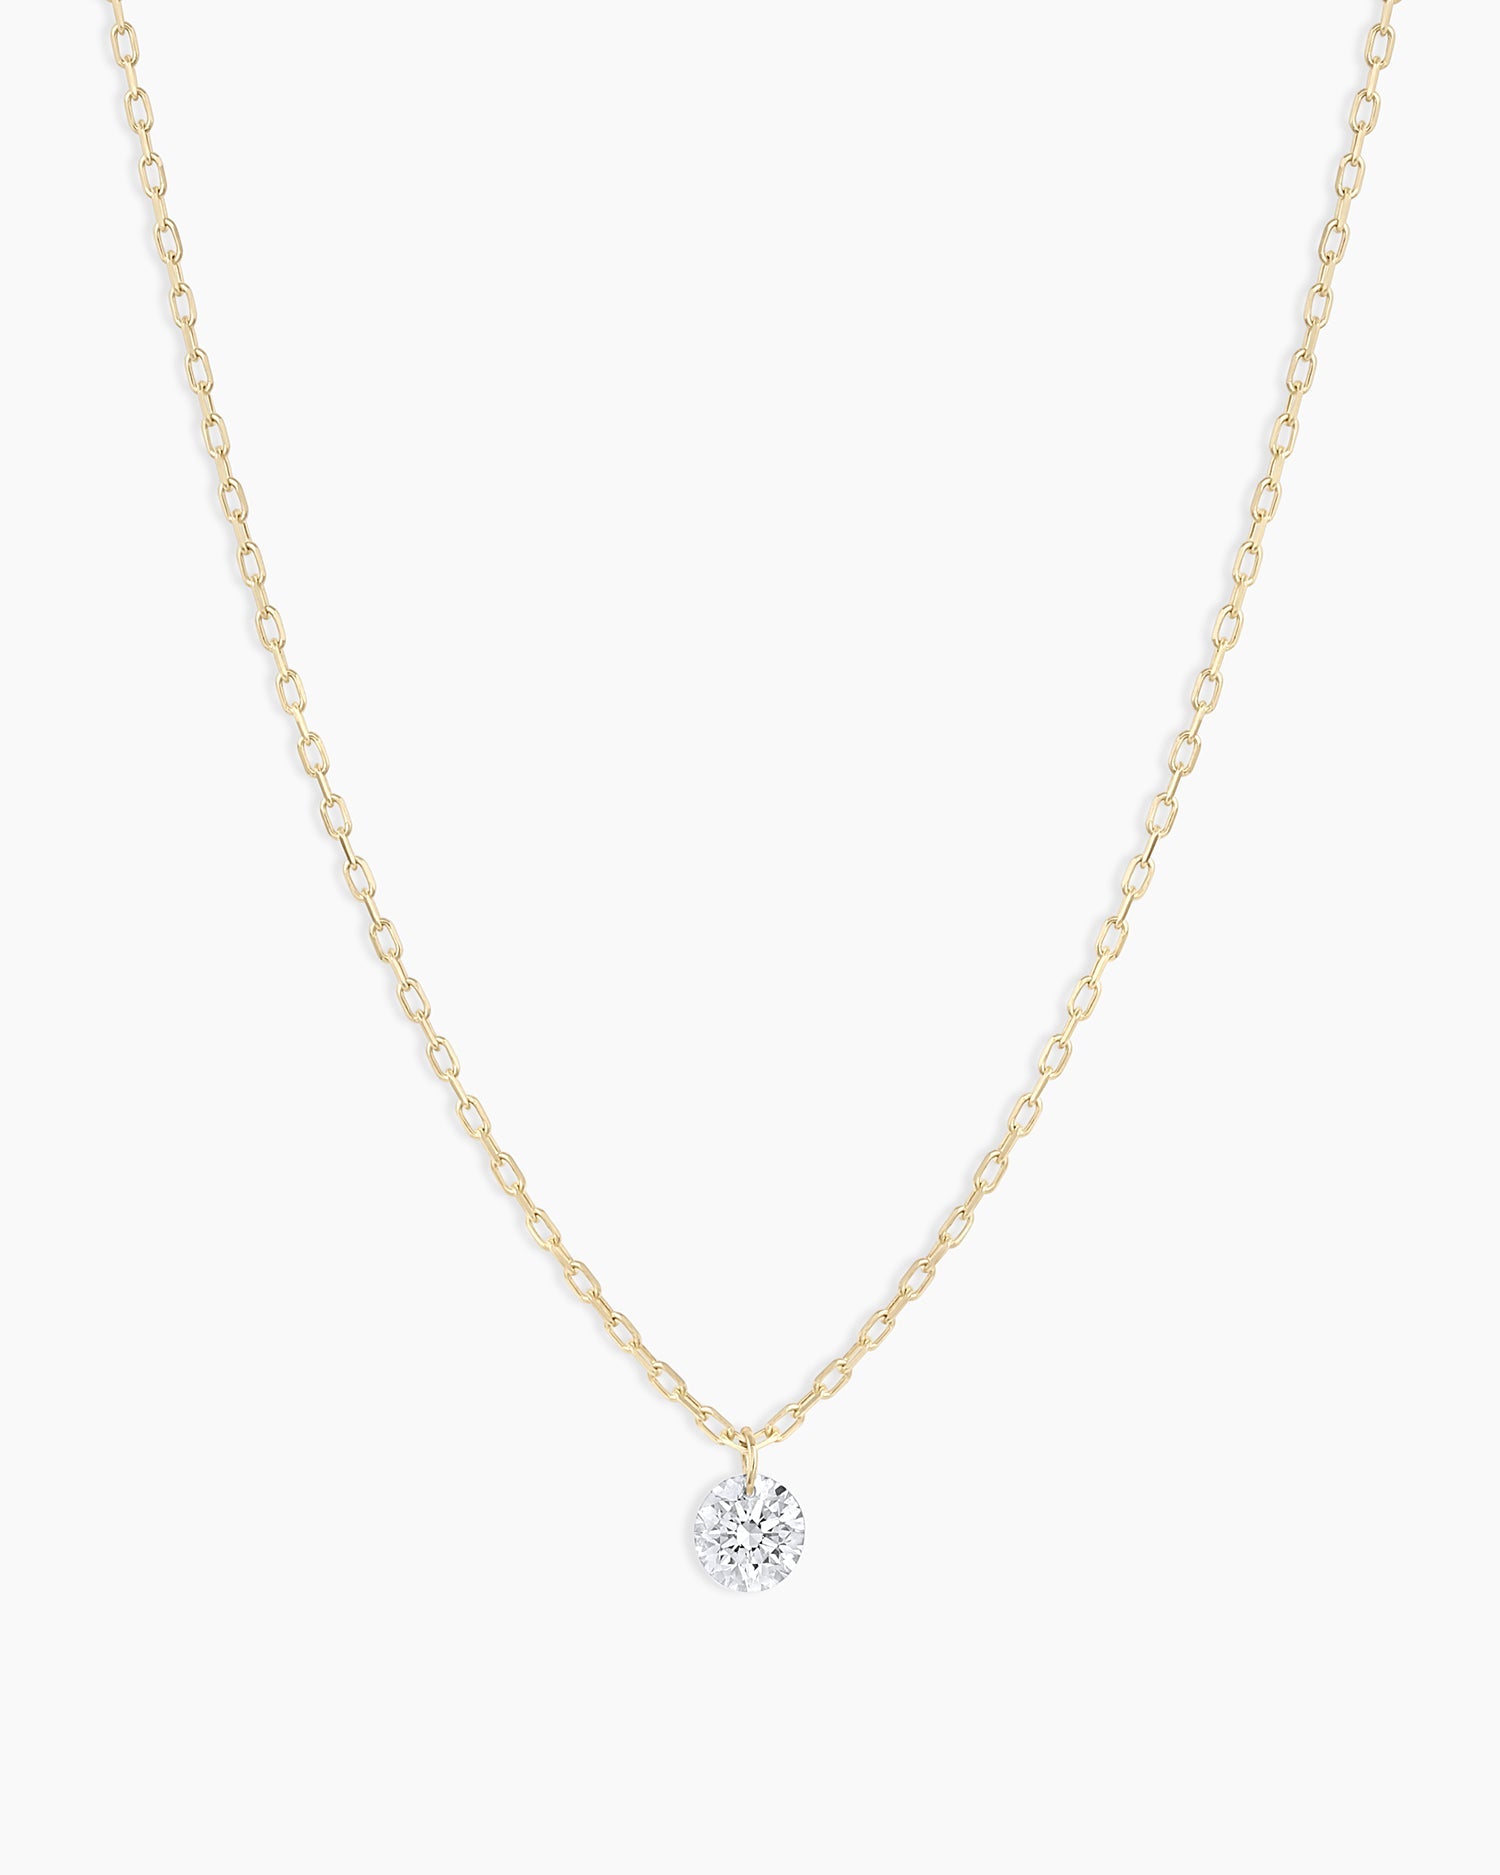 Ethereal White Gold and Diamond Necklace Set